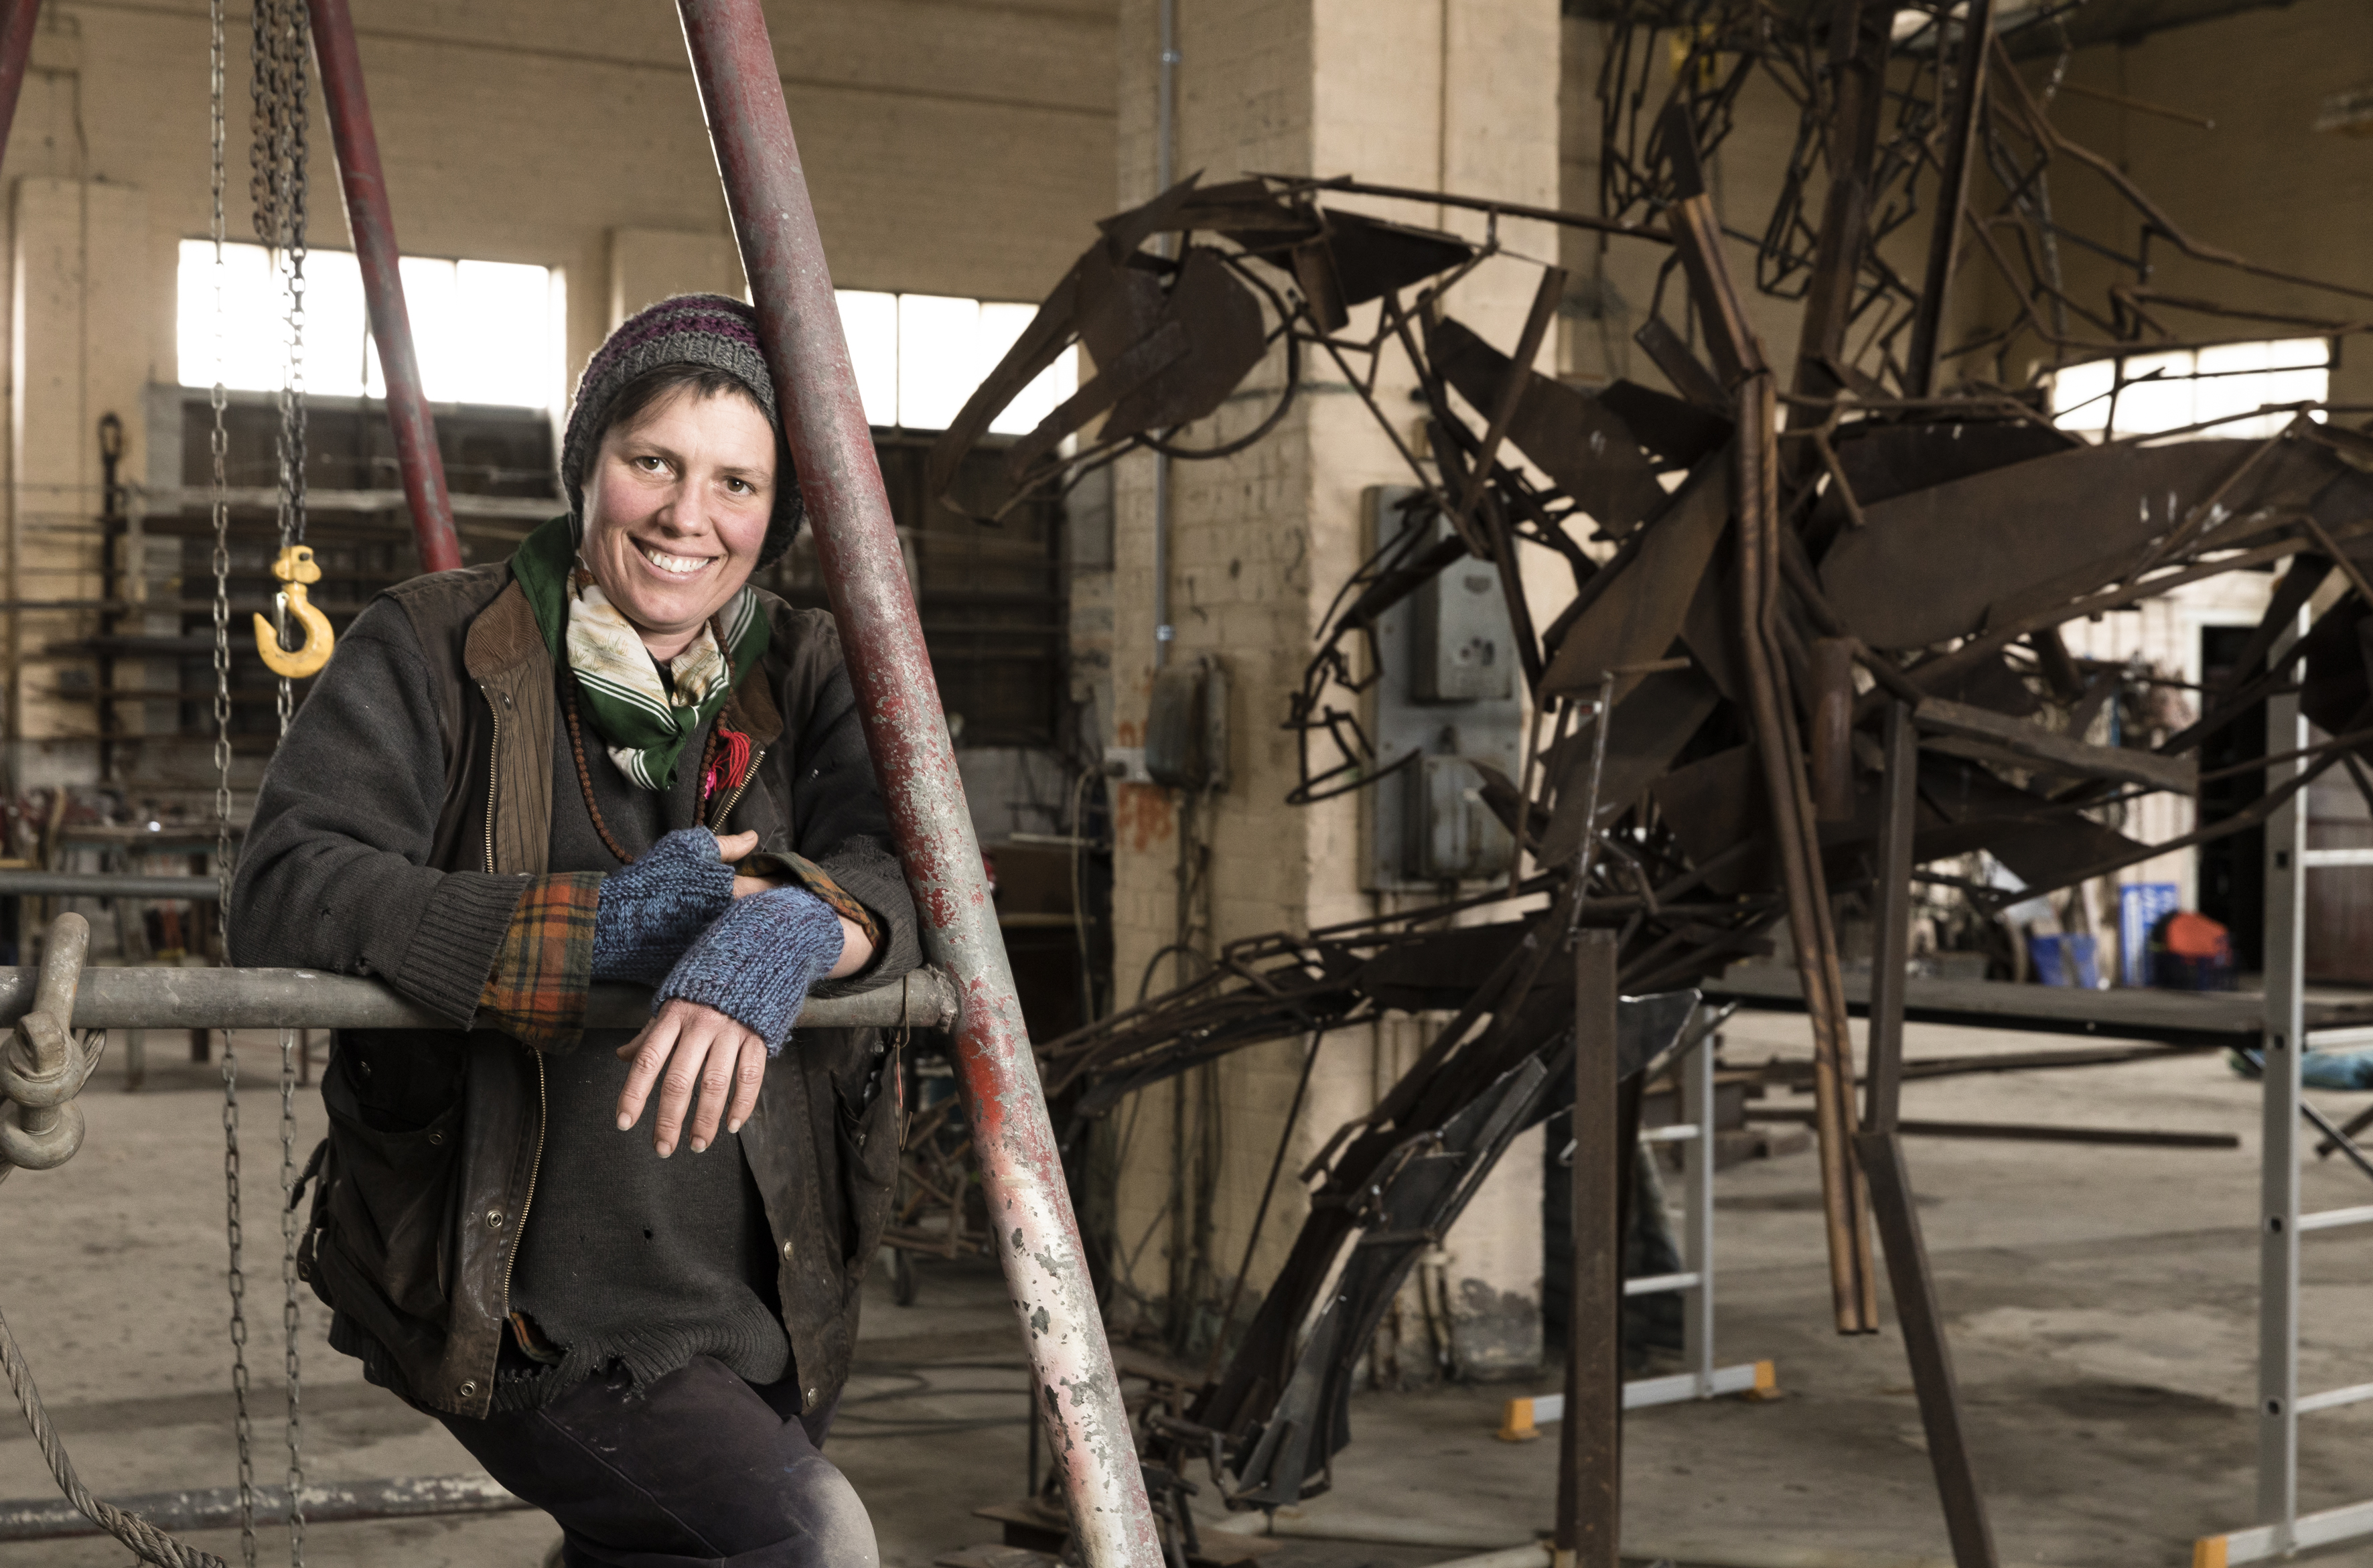 Smiling woman in workshop, she is leaning on a metal joist next to a metal horse sculpture